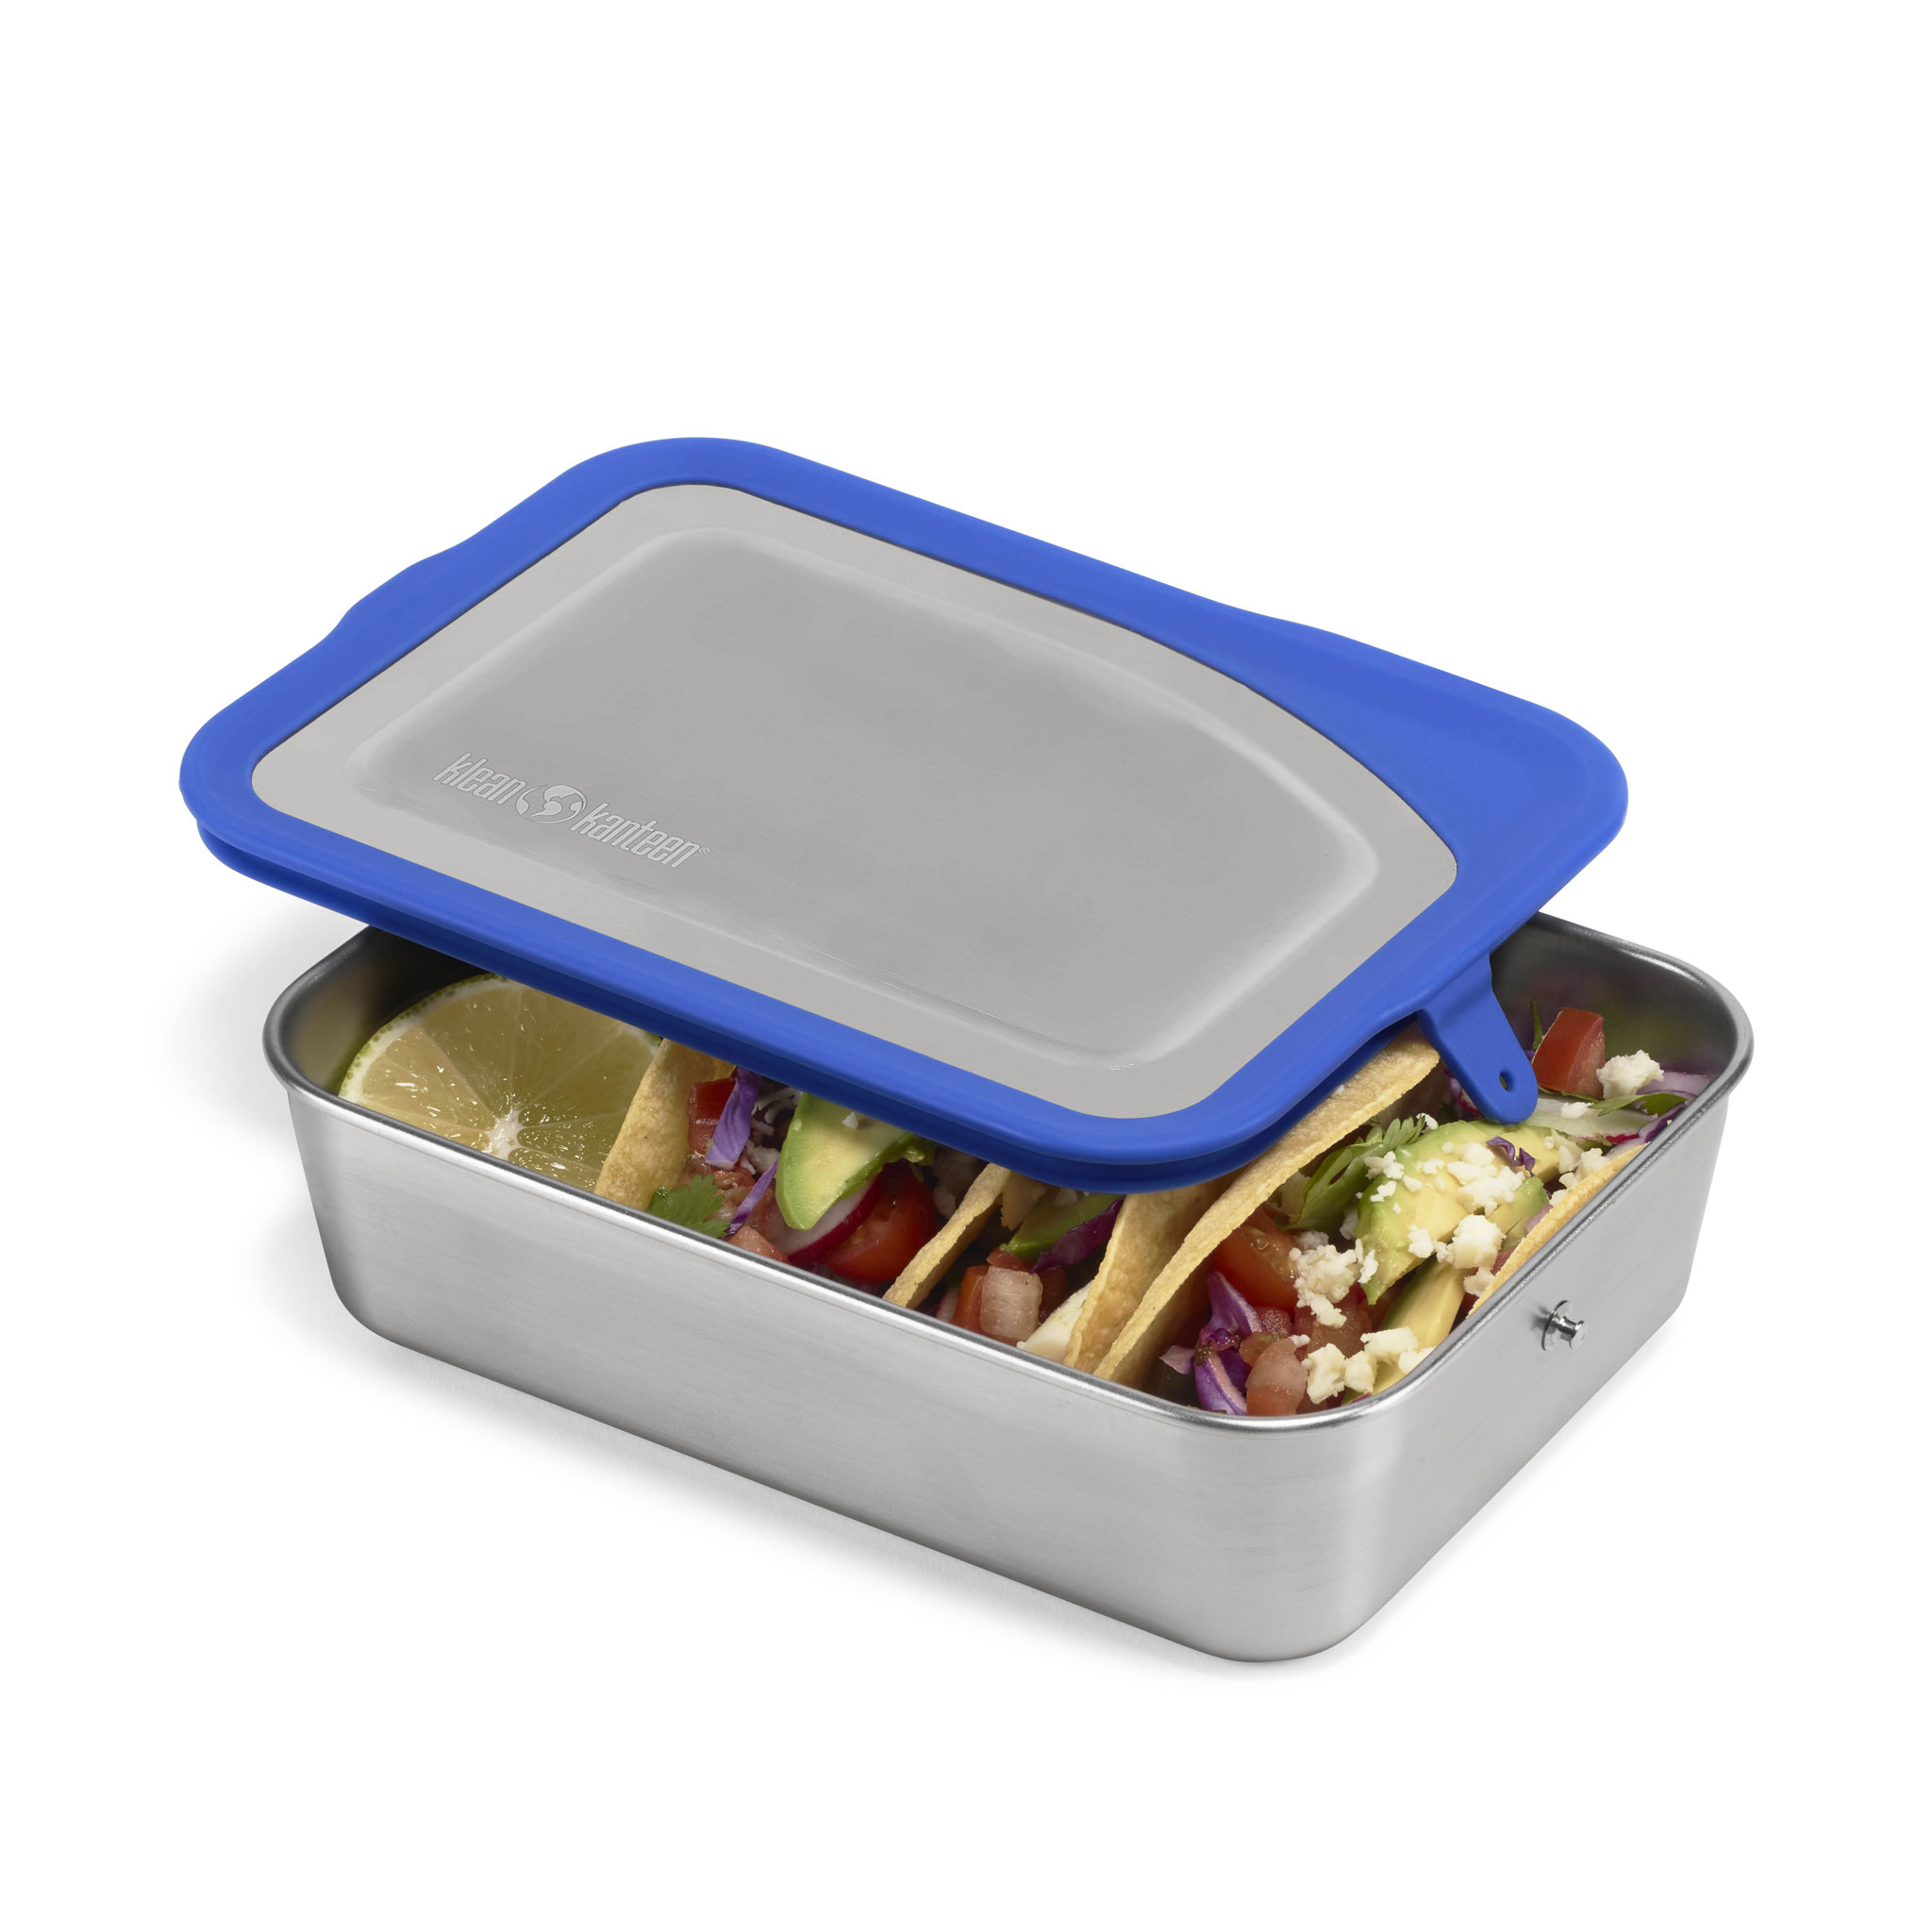 lunch size food box from the B Corp Klean Kanteen  made from durable stainless steel and food-grade silicone lid. 100% plastic-free.